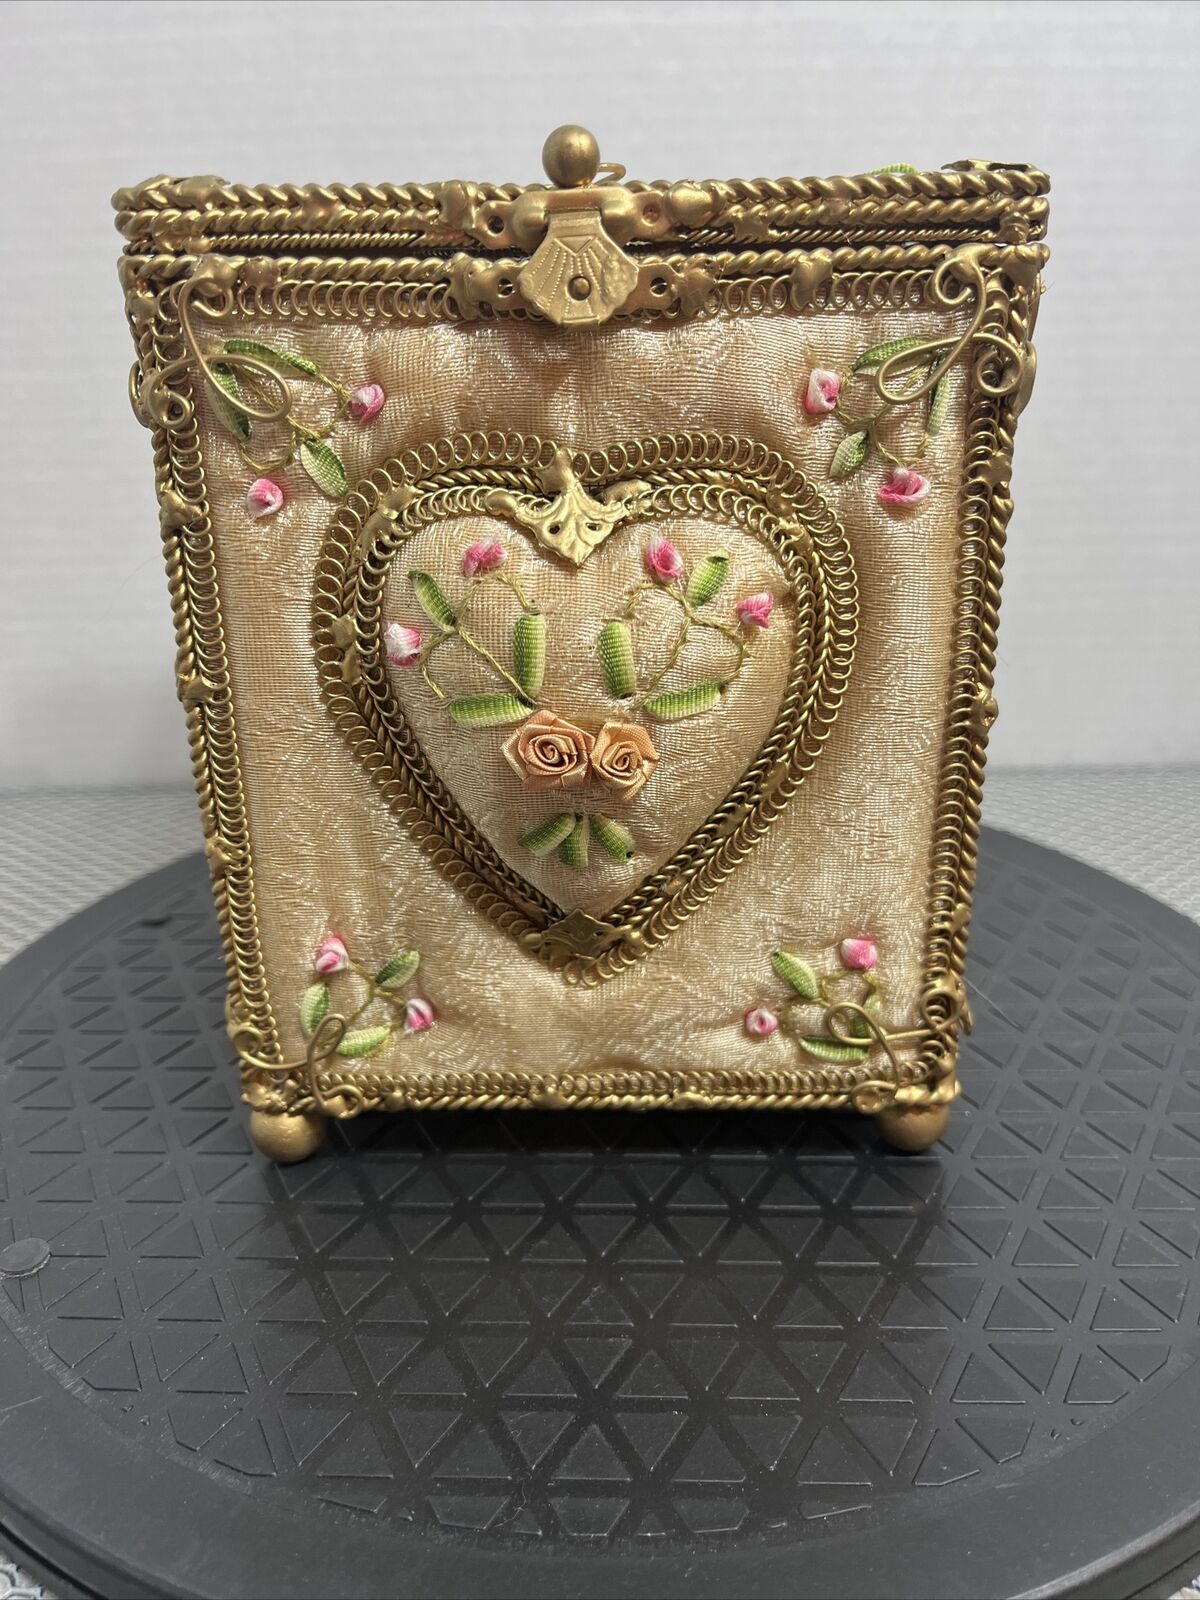 VINTAGE EQUISITE LUXURY FILIGREE TUFTED EMBROIDERED TISSUE BOX COVER